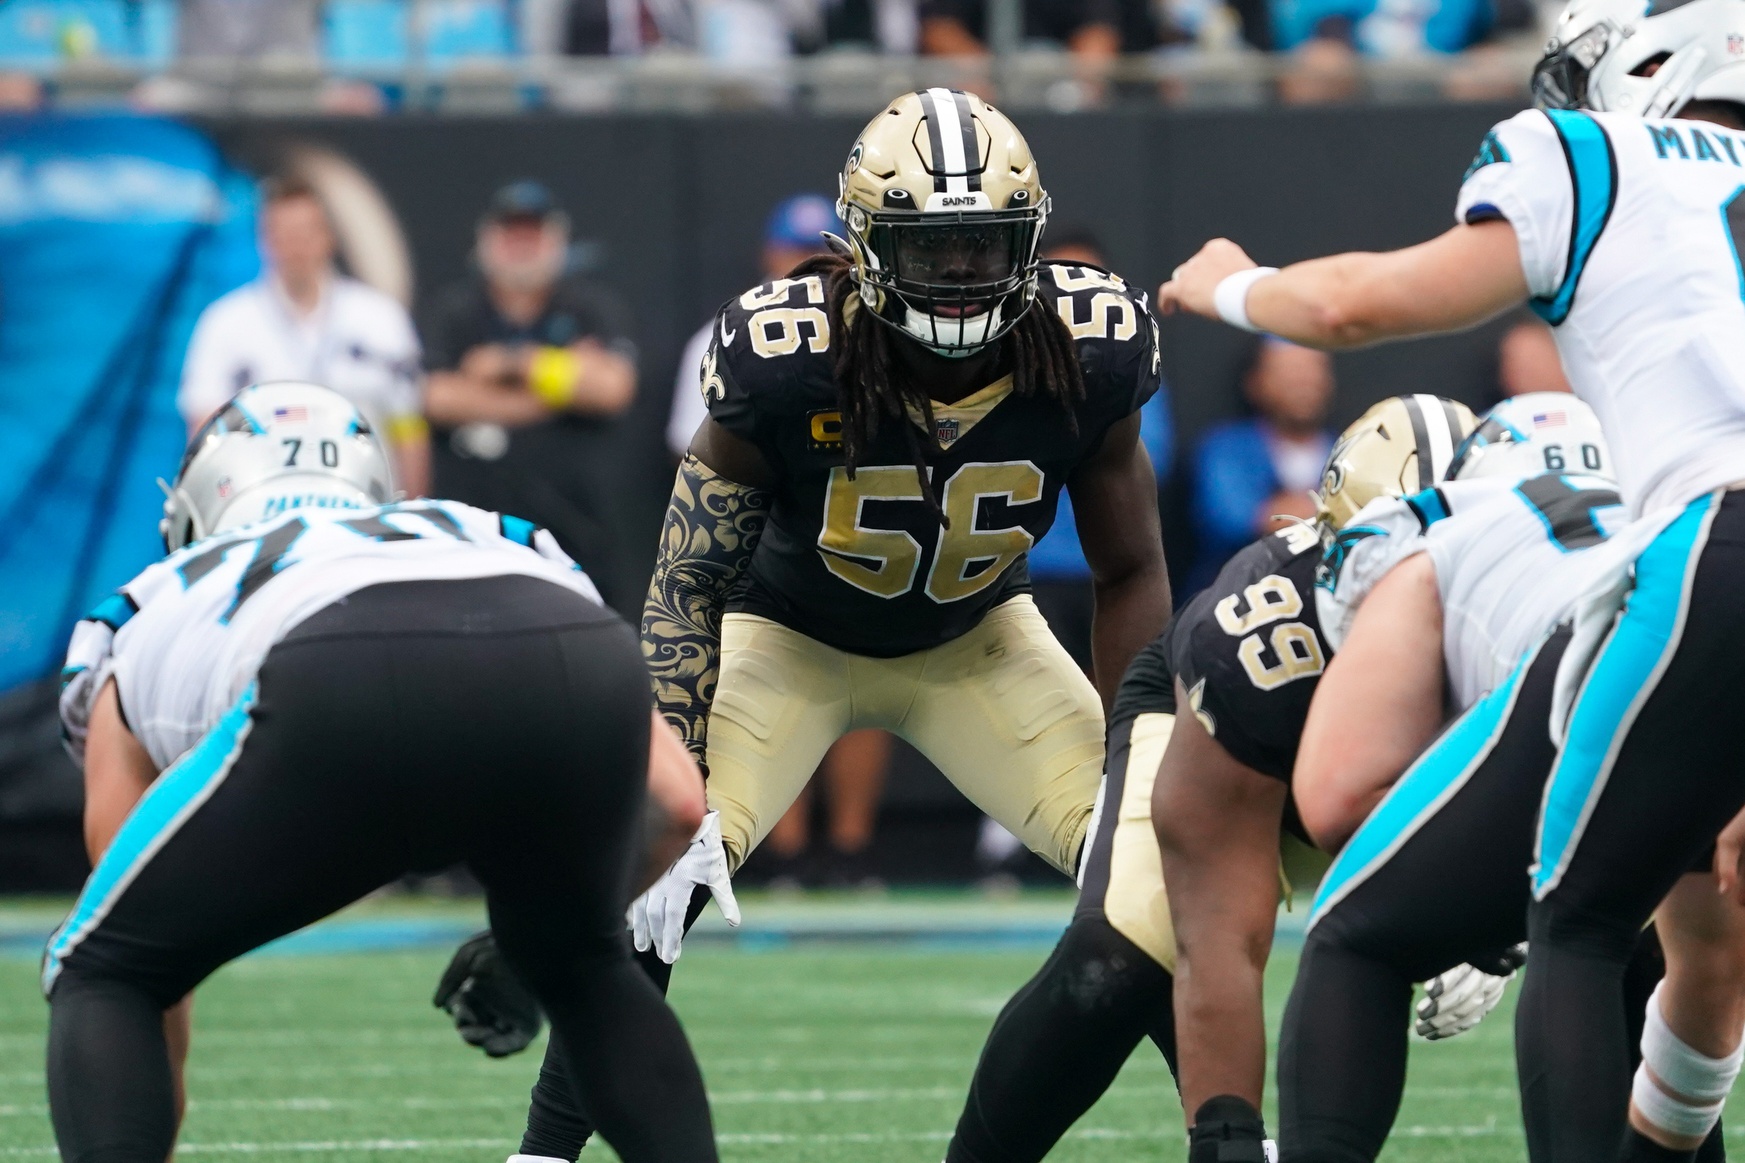 New Orleans Saints linebacker Demario Davis (56) gets ready for a play against the Carolina Panthers. Mandatory Credit: James Guillory-USA TODAY Sports